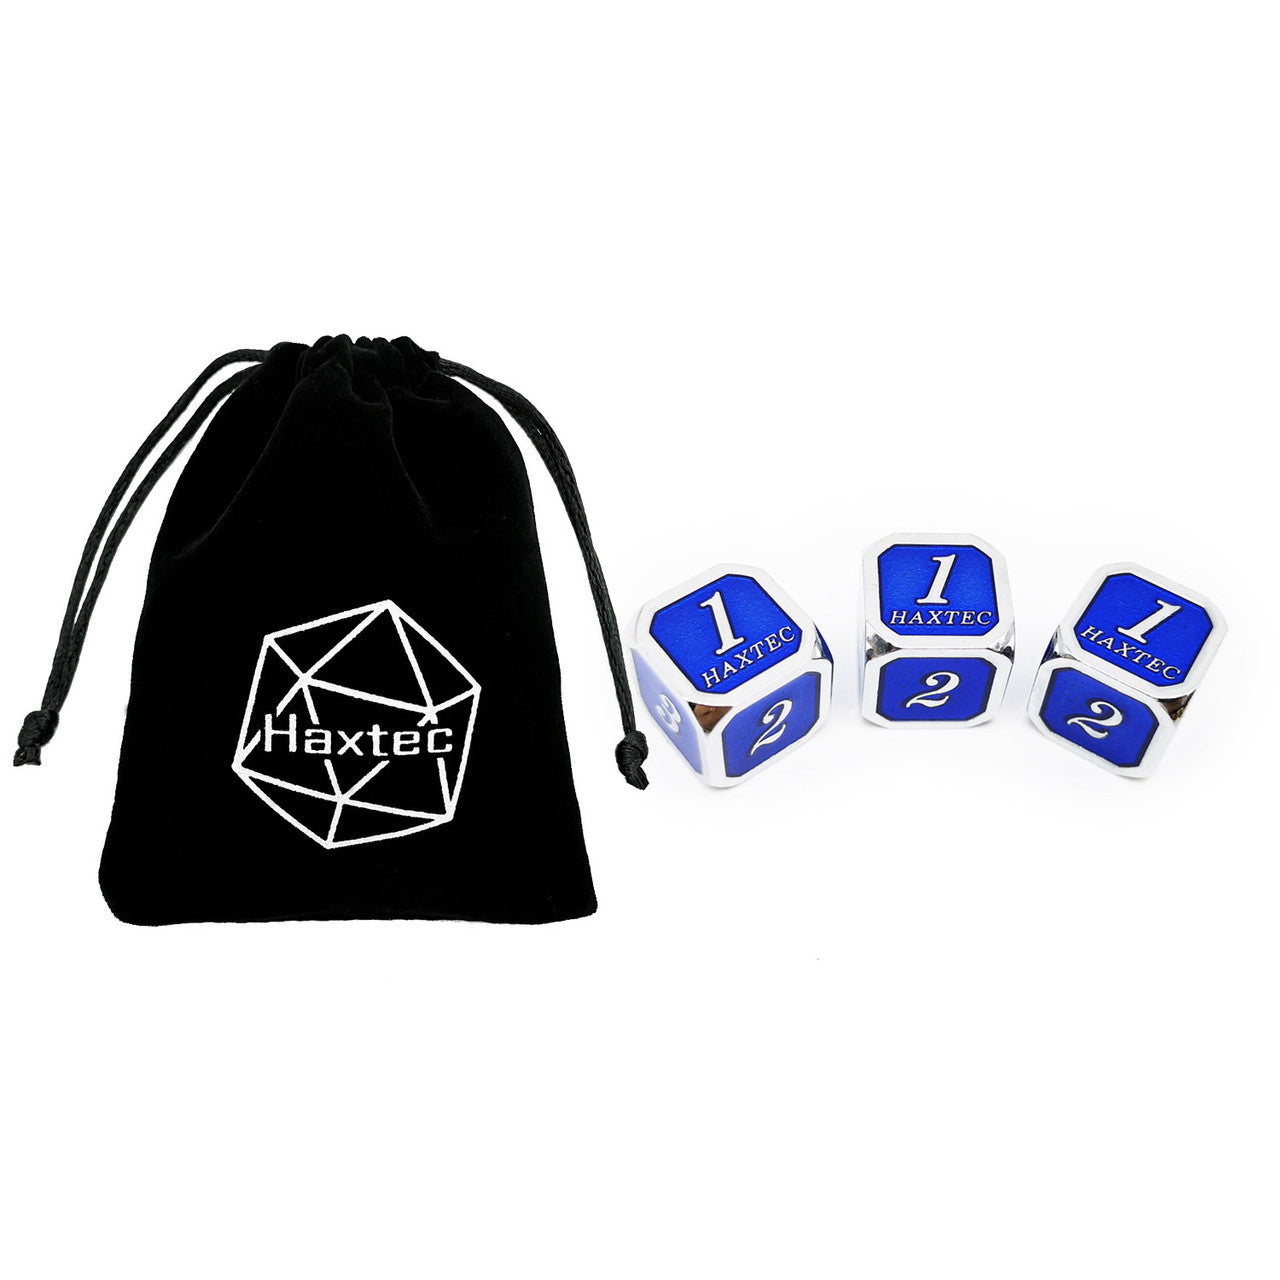 Haxtec D6 dice silver navy blue with protect bag